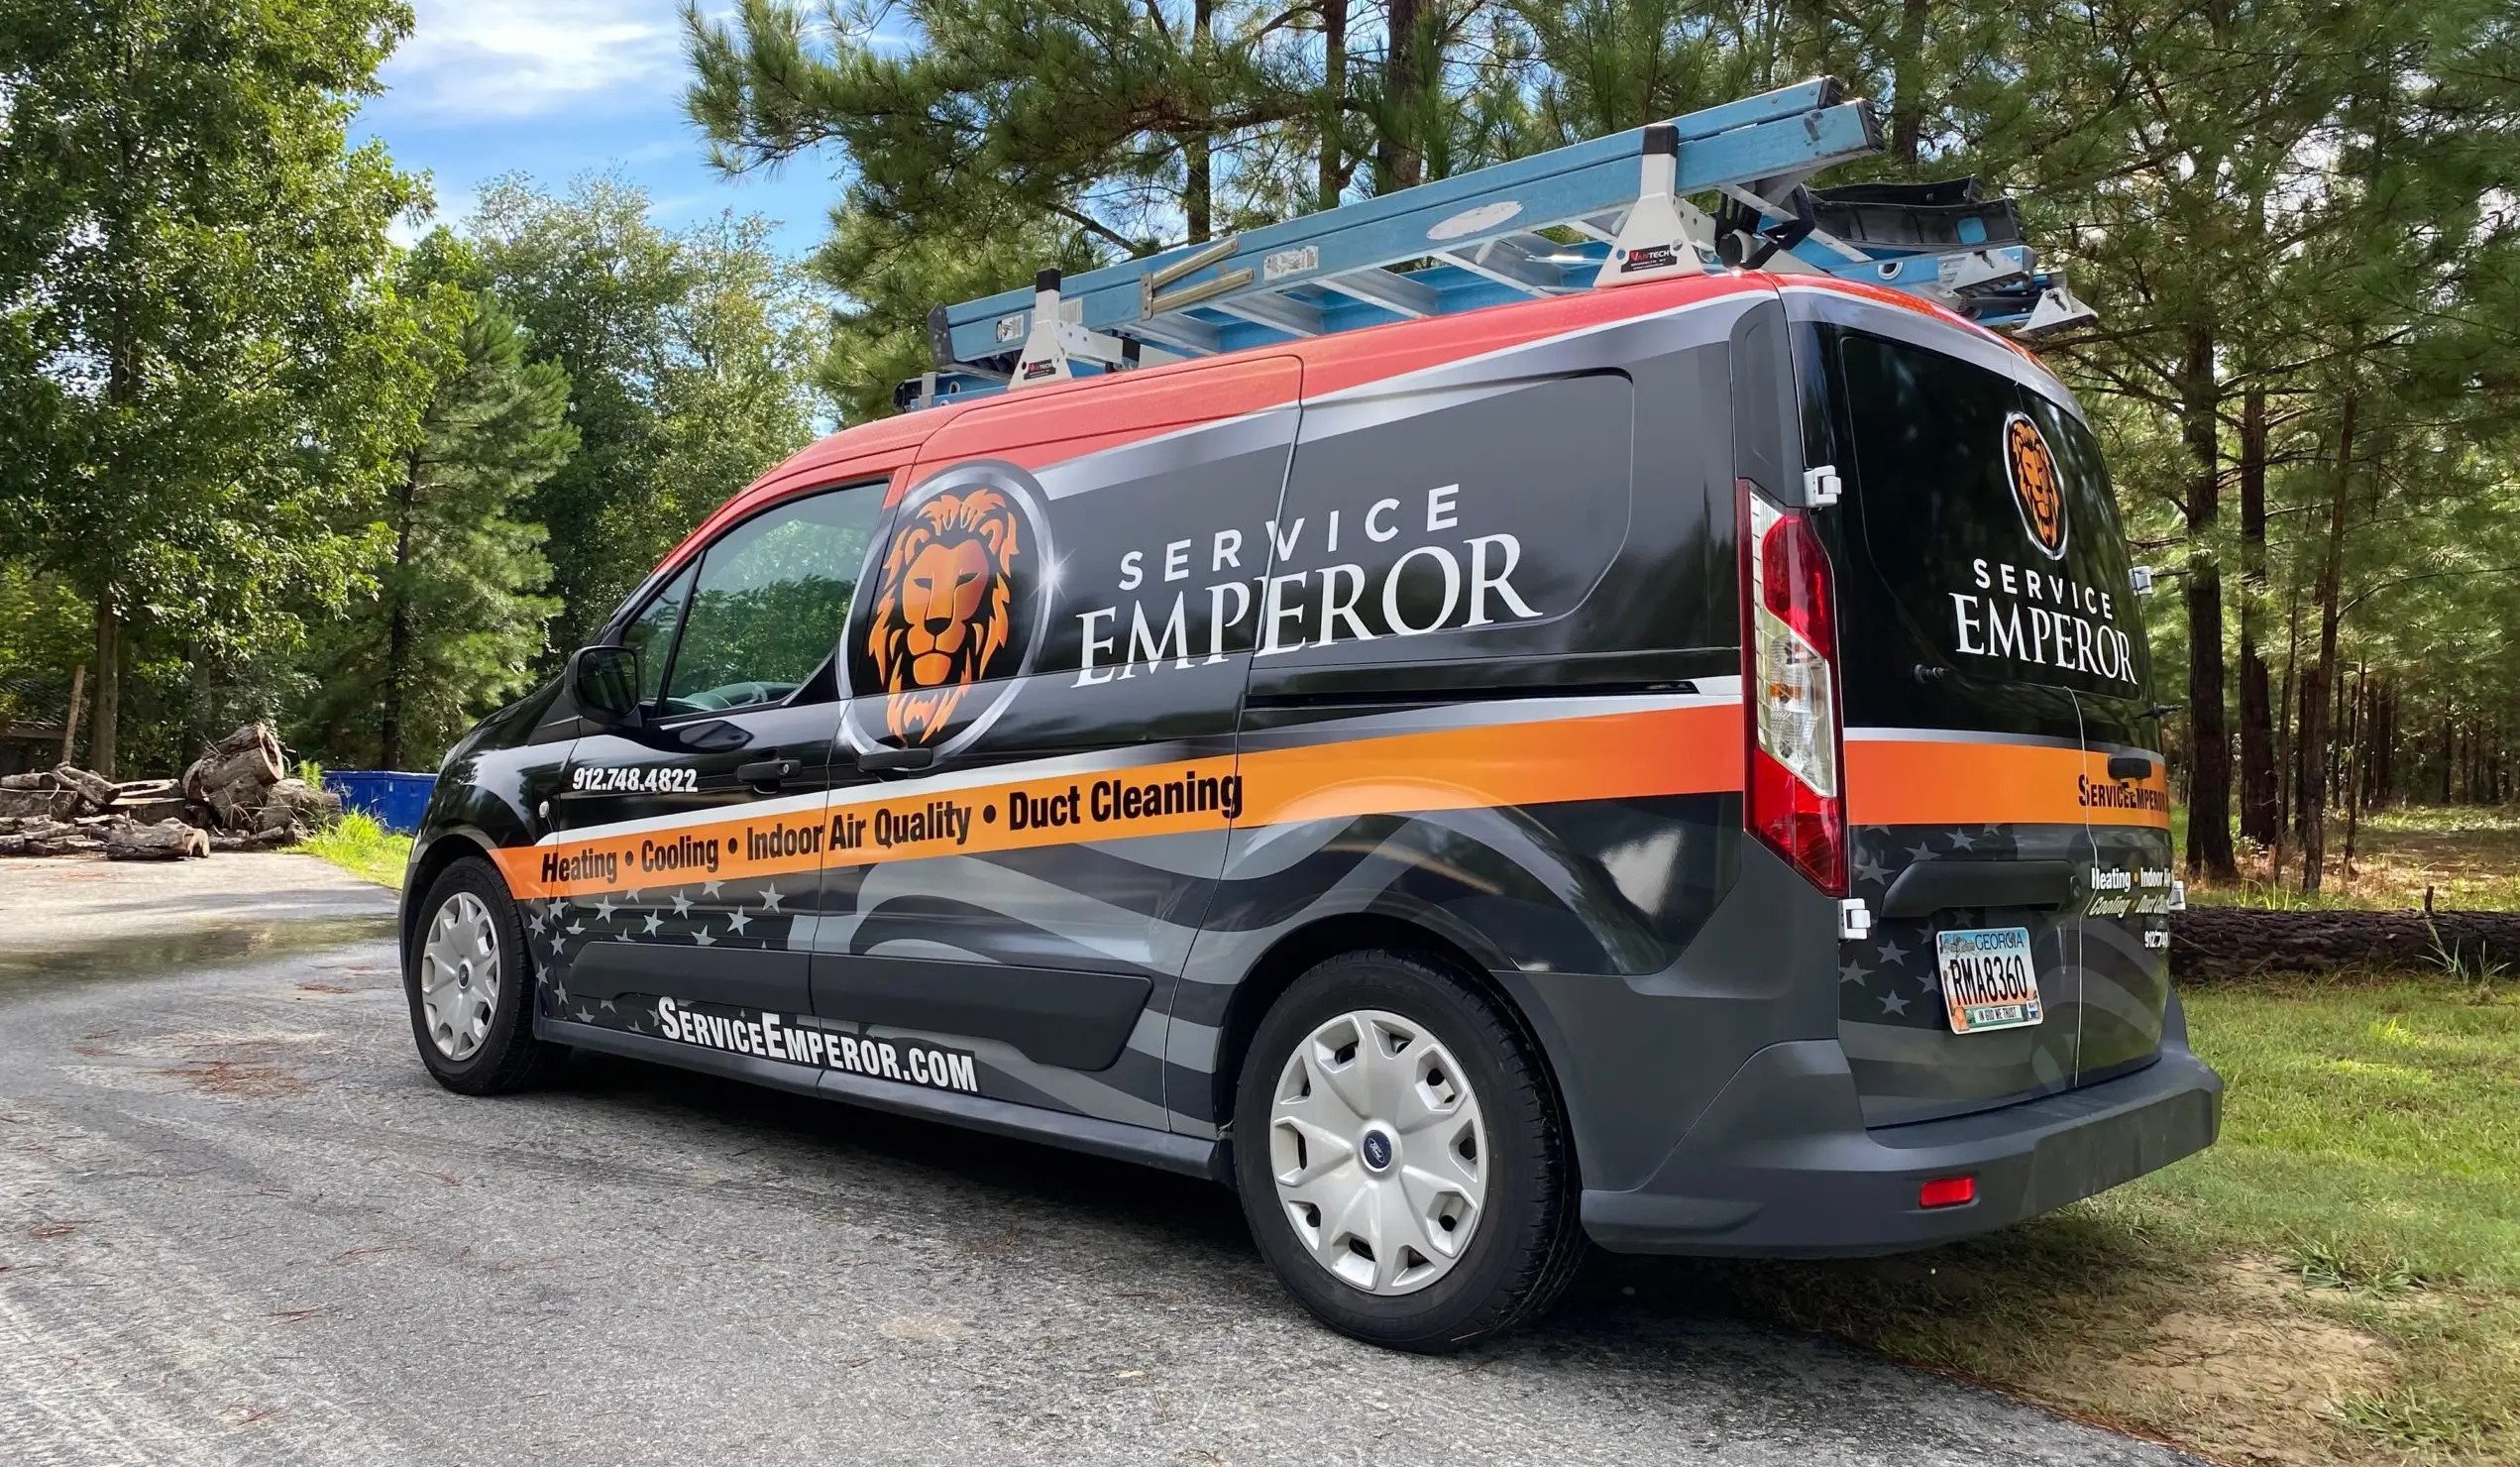 Service Emperor Heating, Air Conditioning, Plumbing, Electrical & More Provides Top-Notch HVAC Services in Savannah, Georgia